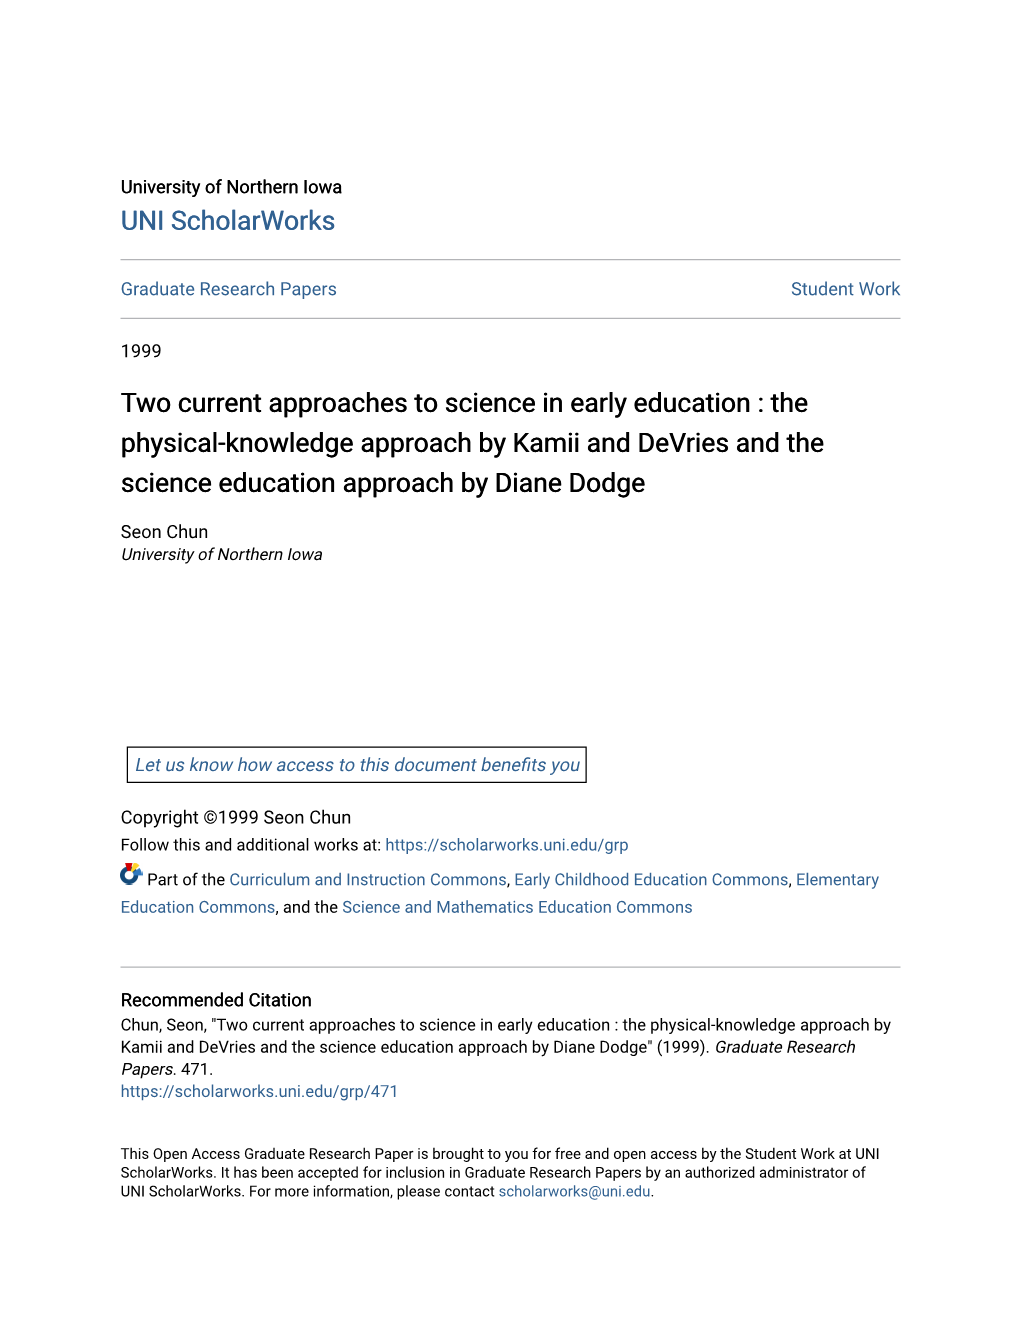 The Physical-Knowledge Approach by Kamii and Devries and the Science Education Approach by Diane Dodge